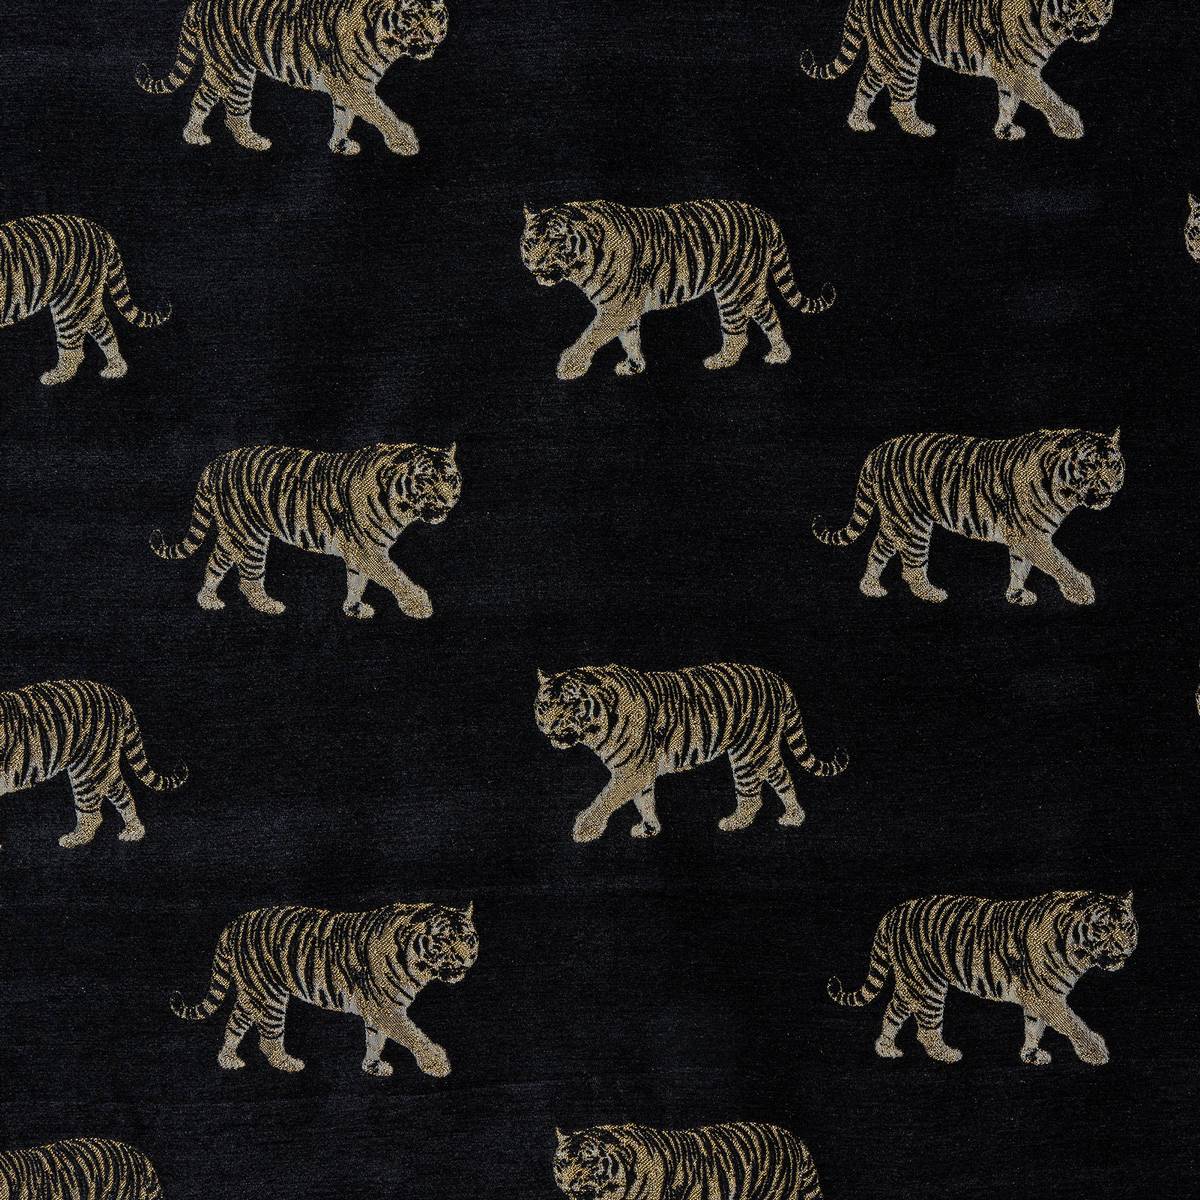 Tiger Noir Fabric by Porter & Stone